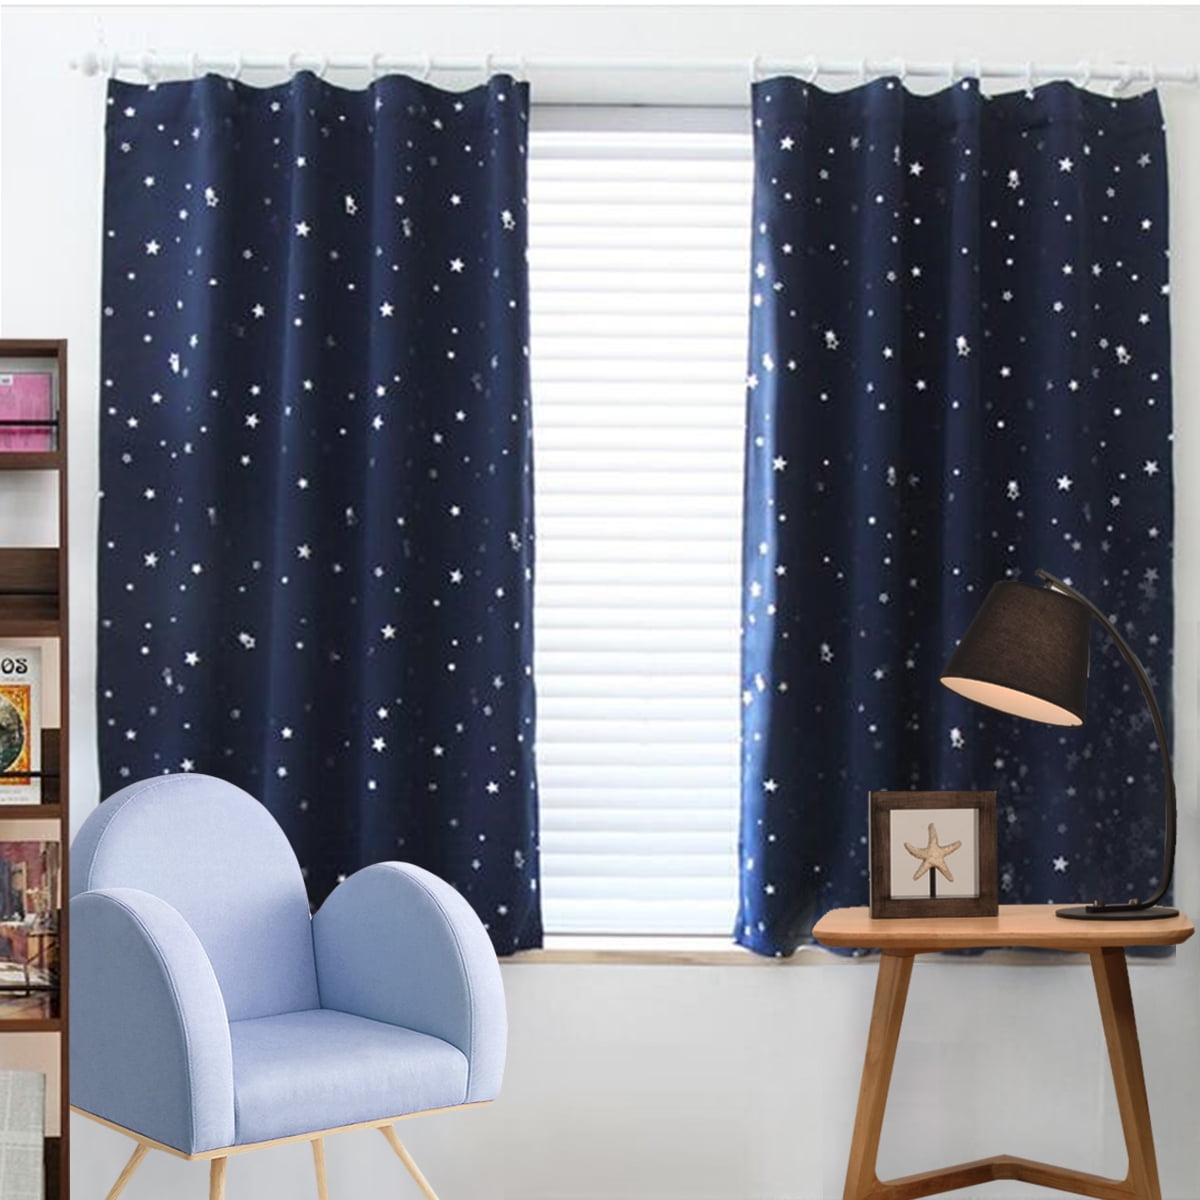 2X Blackout Window Curtains Room Thermal Insulated for Kids Boy Girls Bedroom 